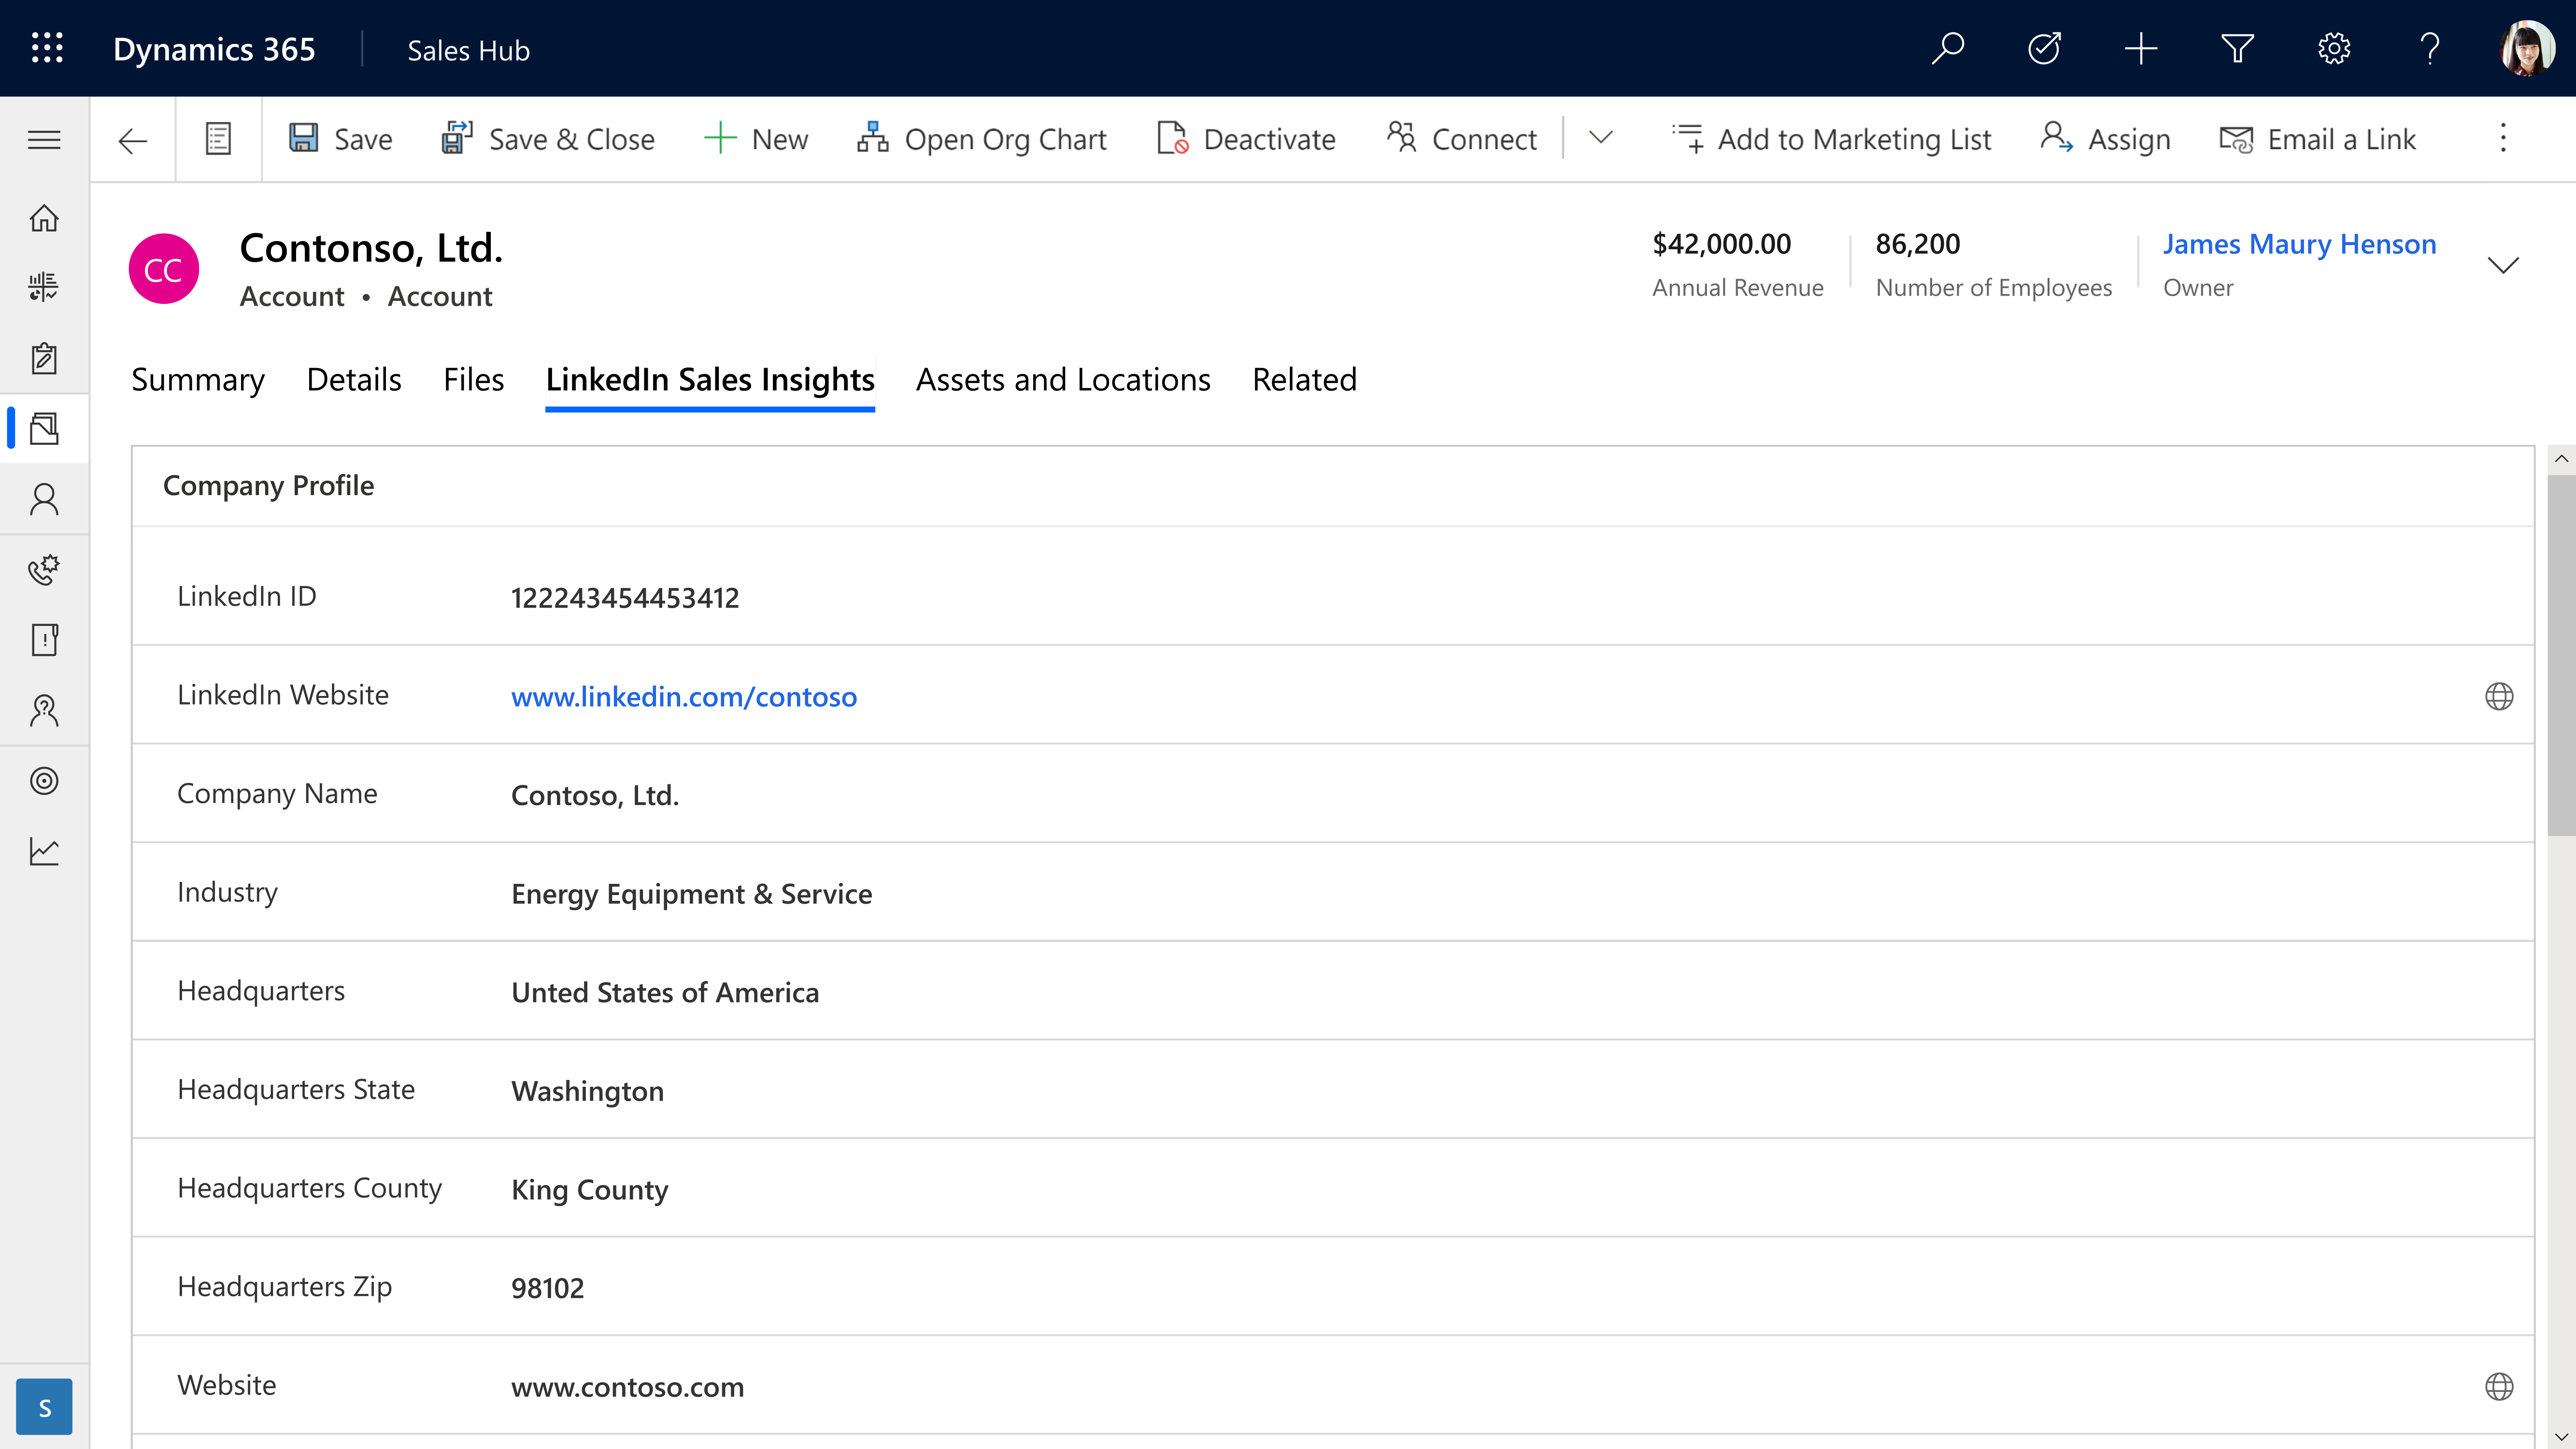 With LinkedIn Sales Insights, company information can be brought into Dynamics 365 Sales